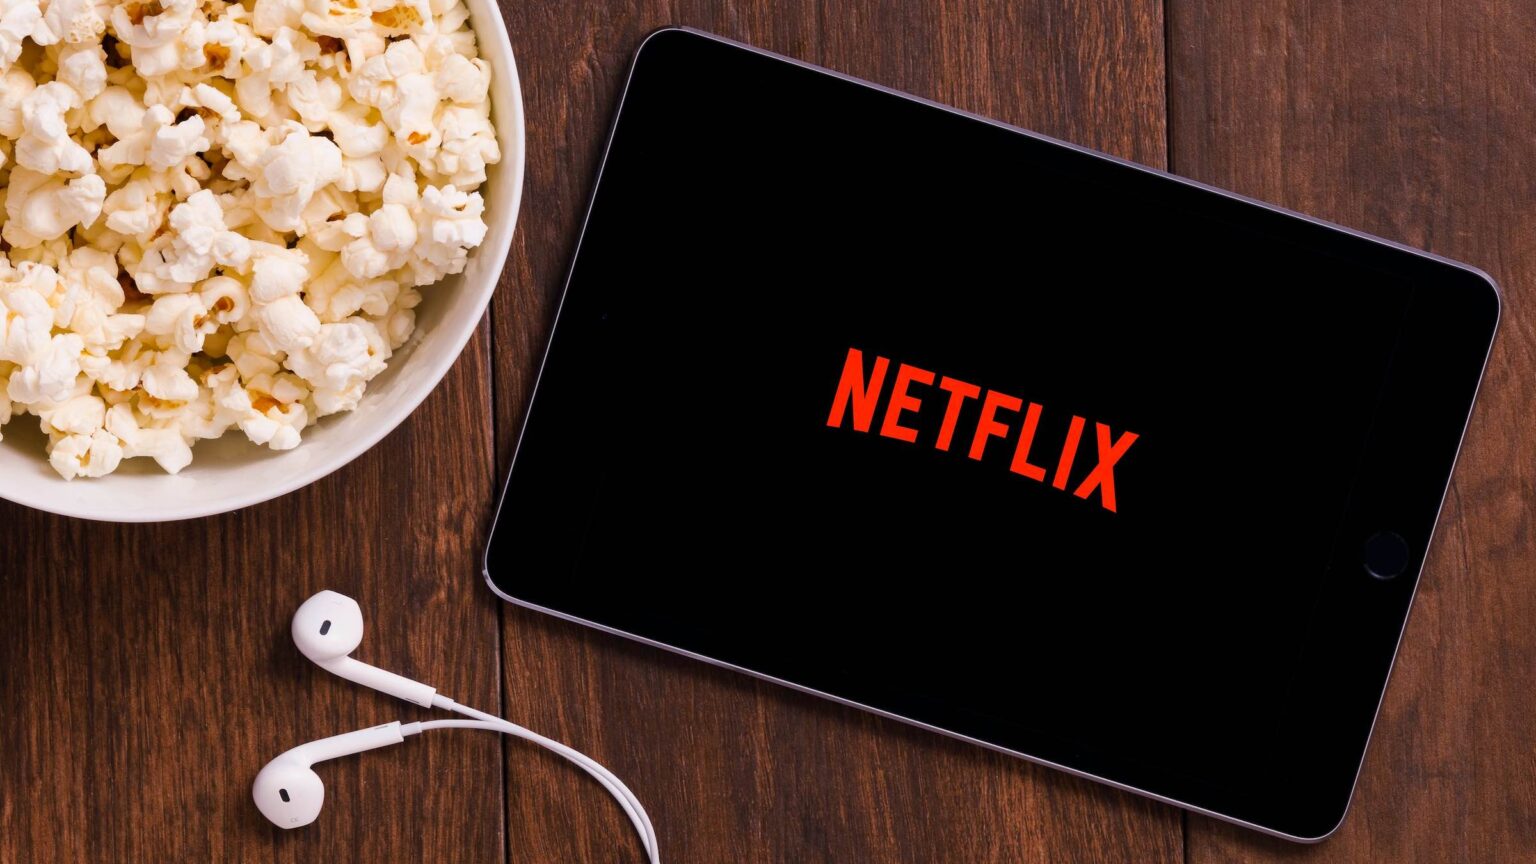 Netflix is expanding into the video game world. Plug into the story and find out if games will boost your monthly cost to the streaming giant.